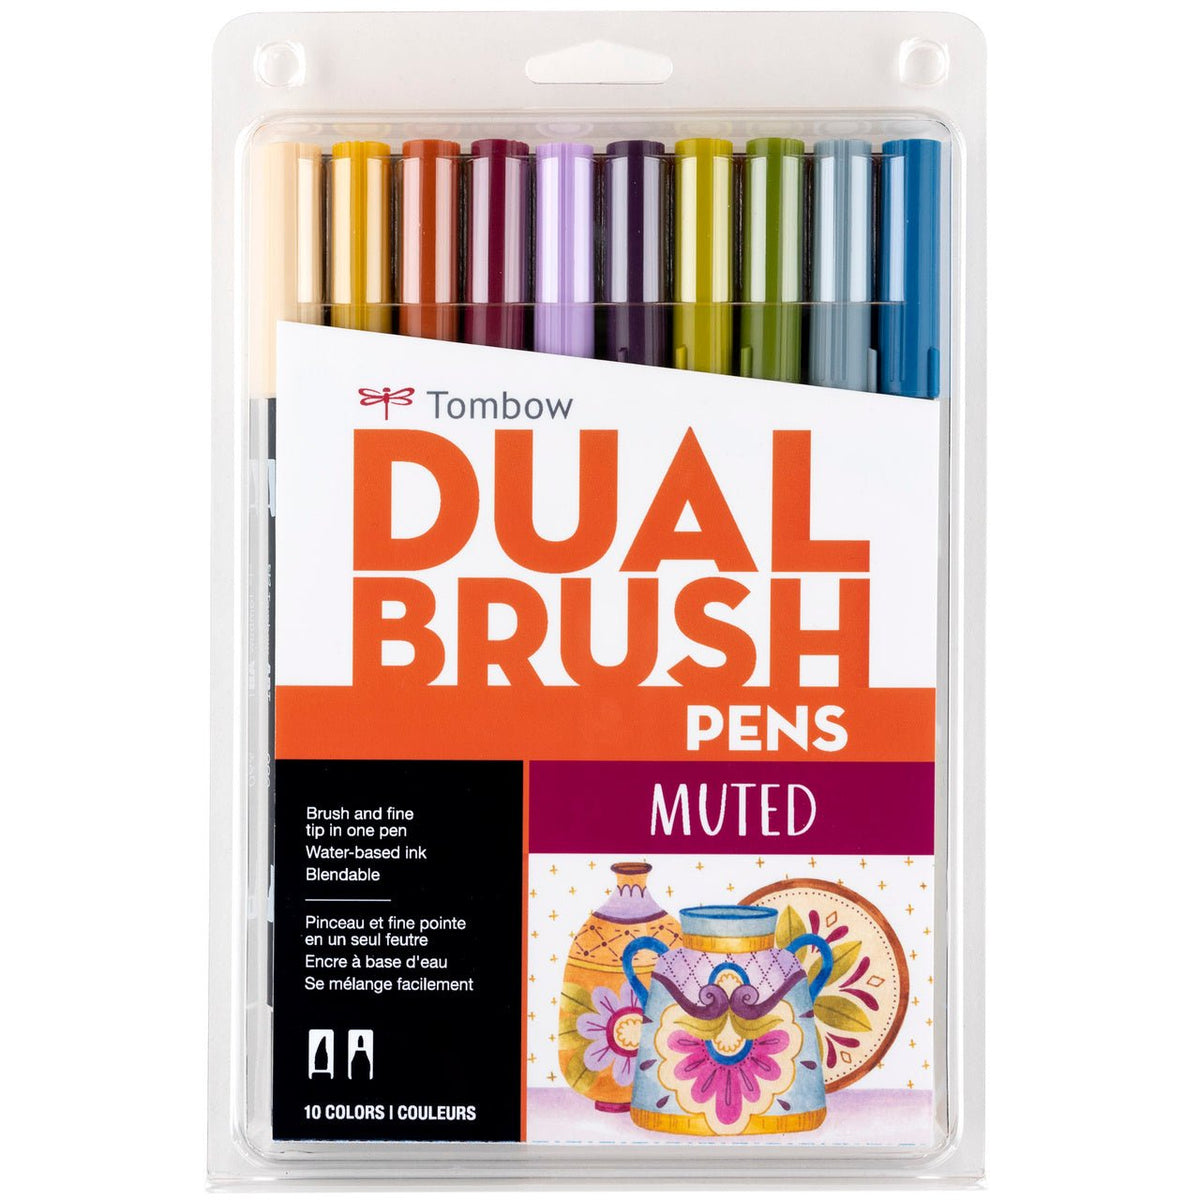 https://cdn.shopify.com/s/files/1/0006/8947/1551/products/tombow-dual-brush-marker-set-of-10-muted-colors-297247_1200x.jpg?v=1671502410